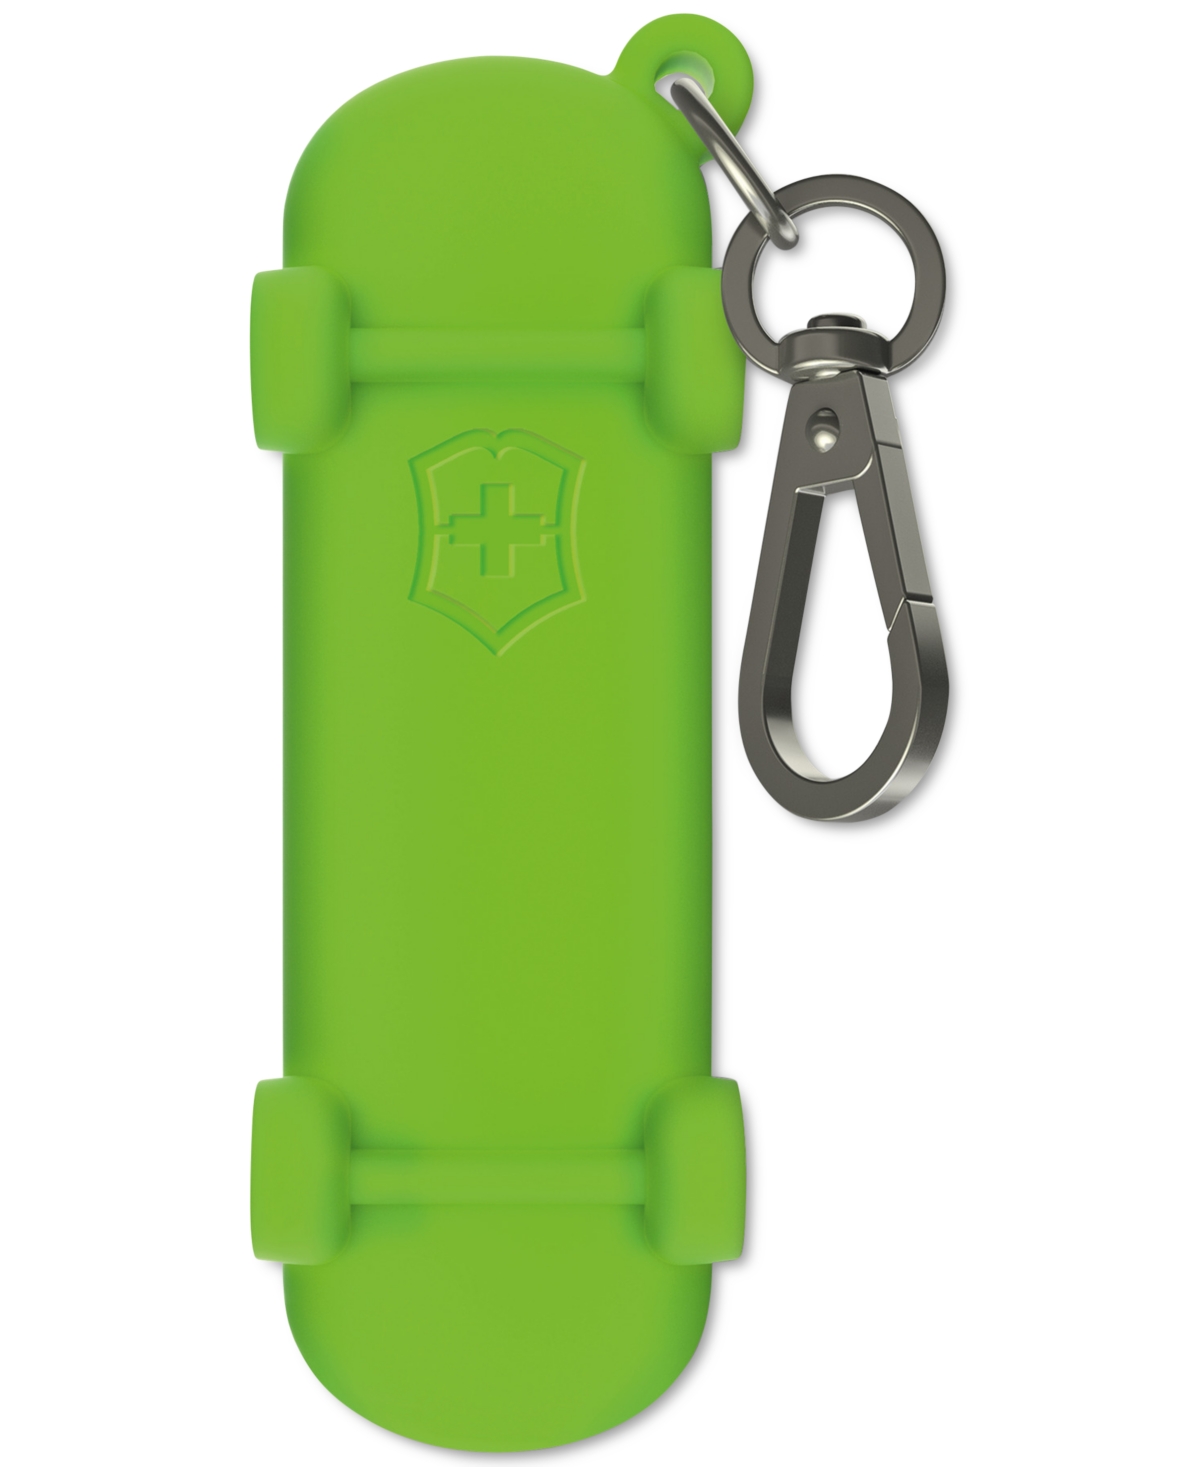 Victorinox Swiss Army Silicone Case, Skateboard In Smashed Avacado